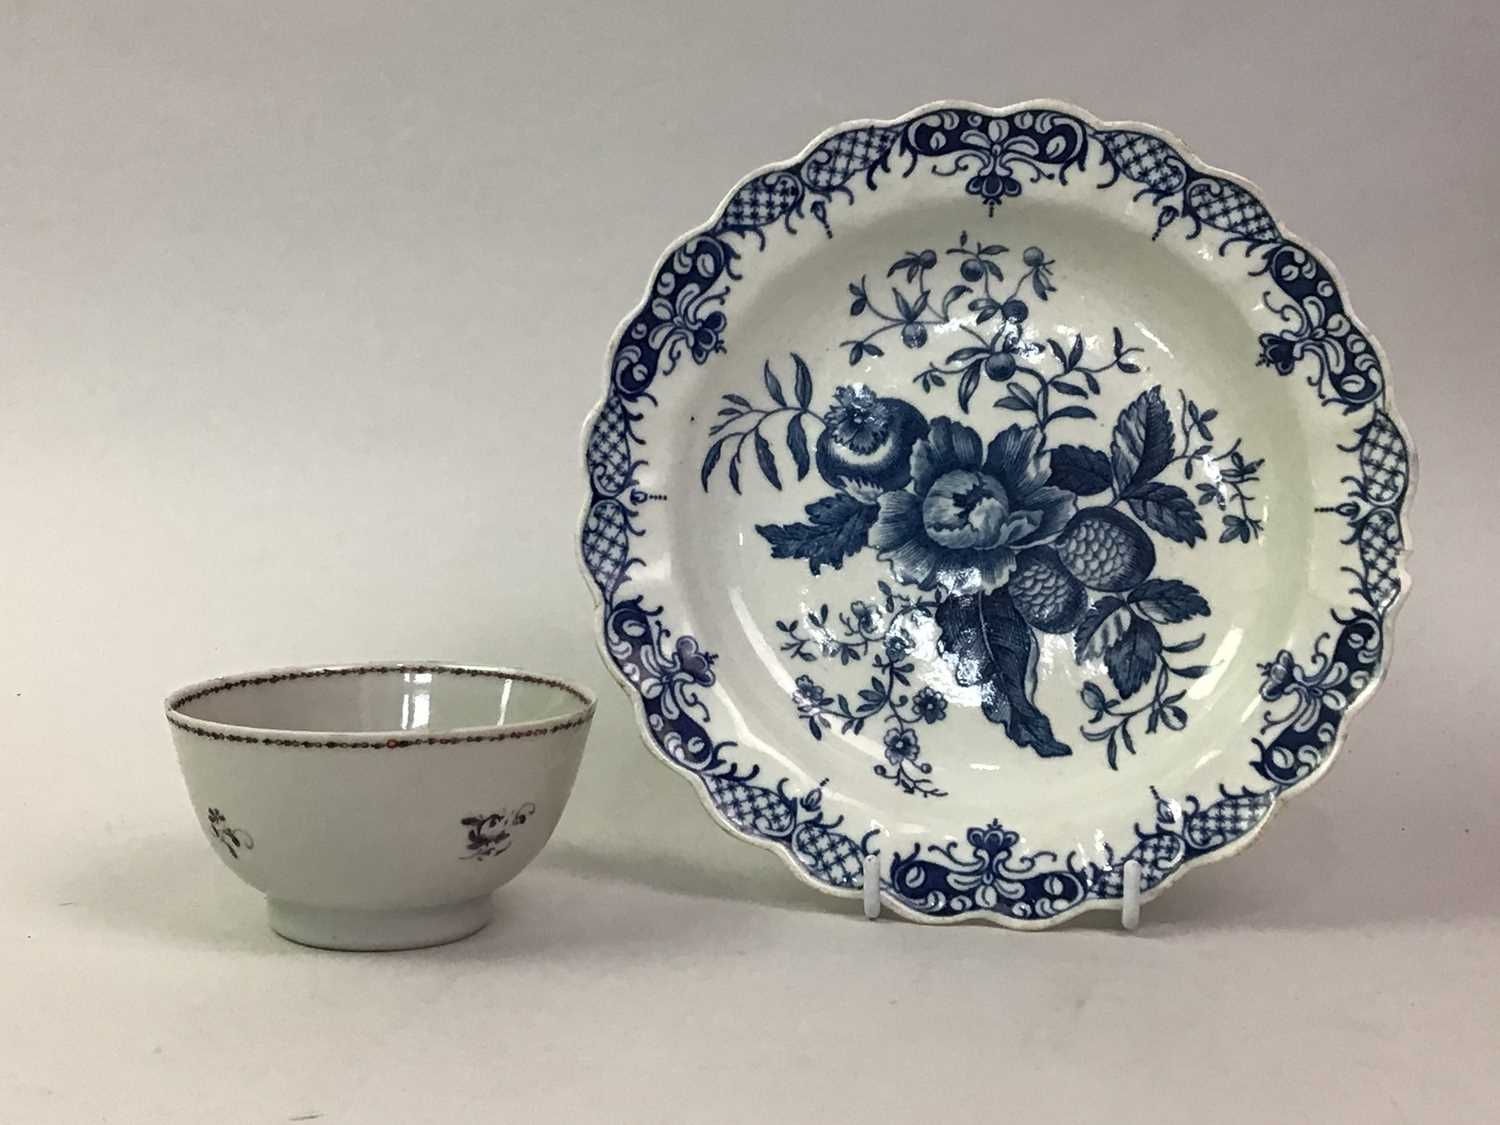 NAUTALIS PORCELAIN CUP, SAUCER, SIDE PLATE AND BISCUIT PLATE, ALONG WITH 18TH CENTURY AND LATER ENGL - Image 6 of 7